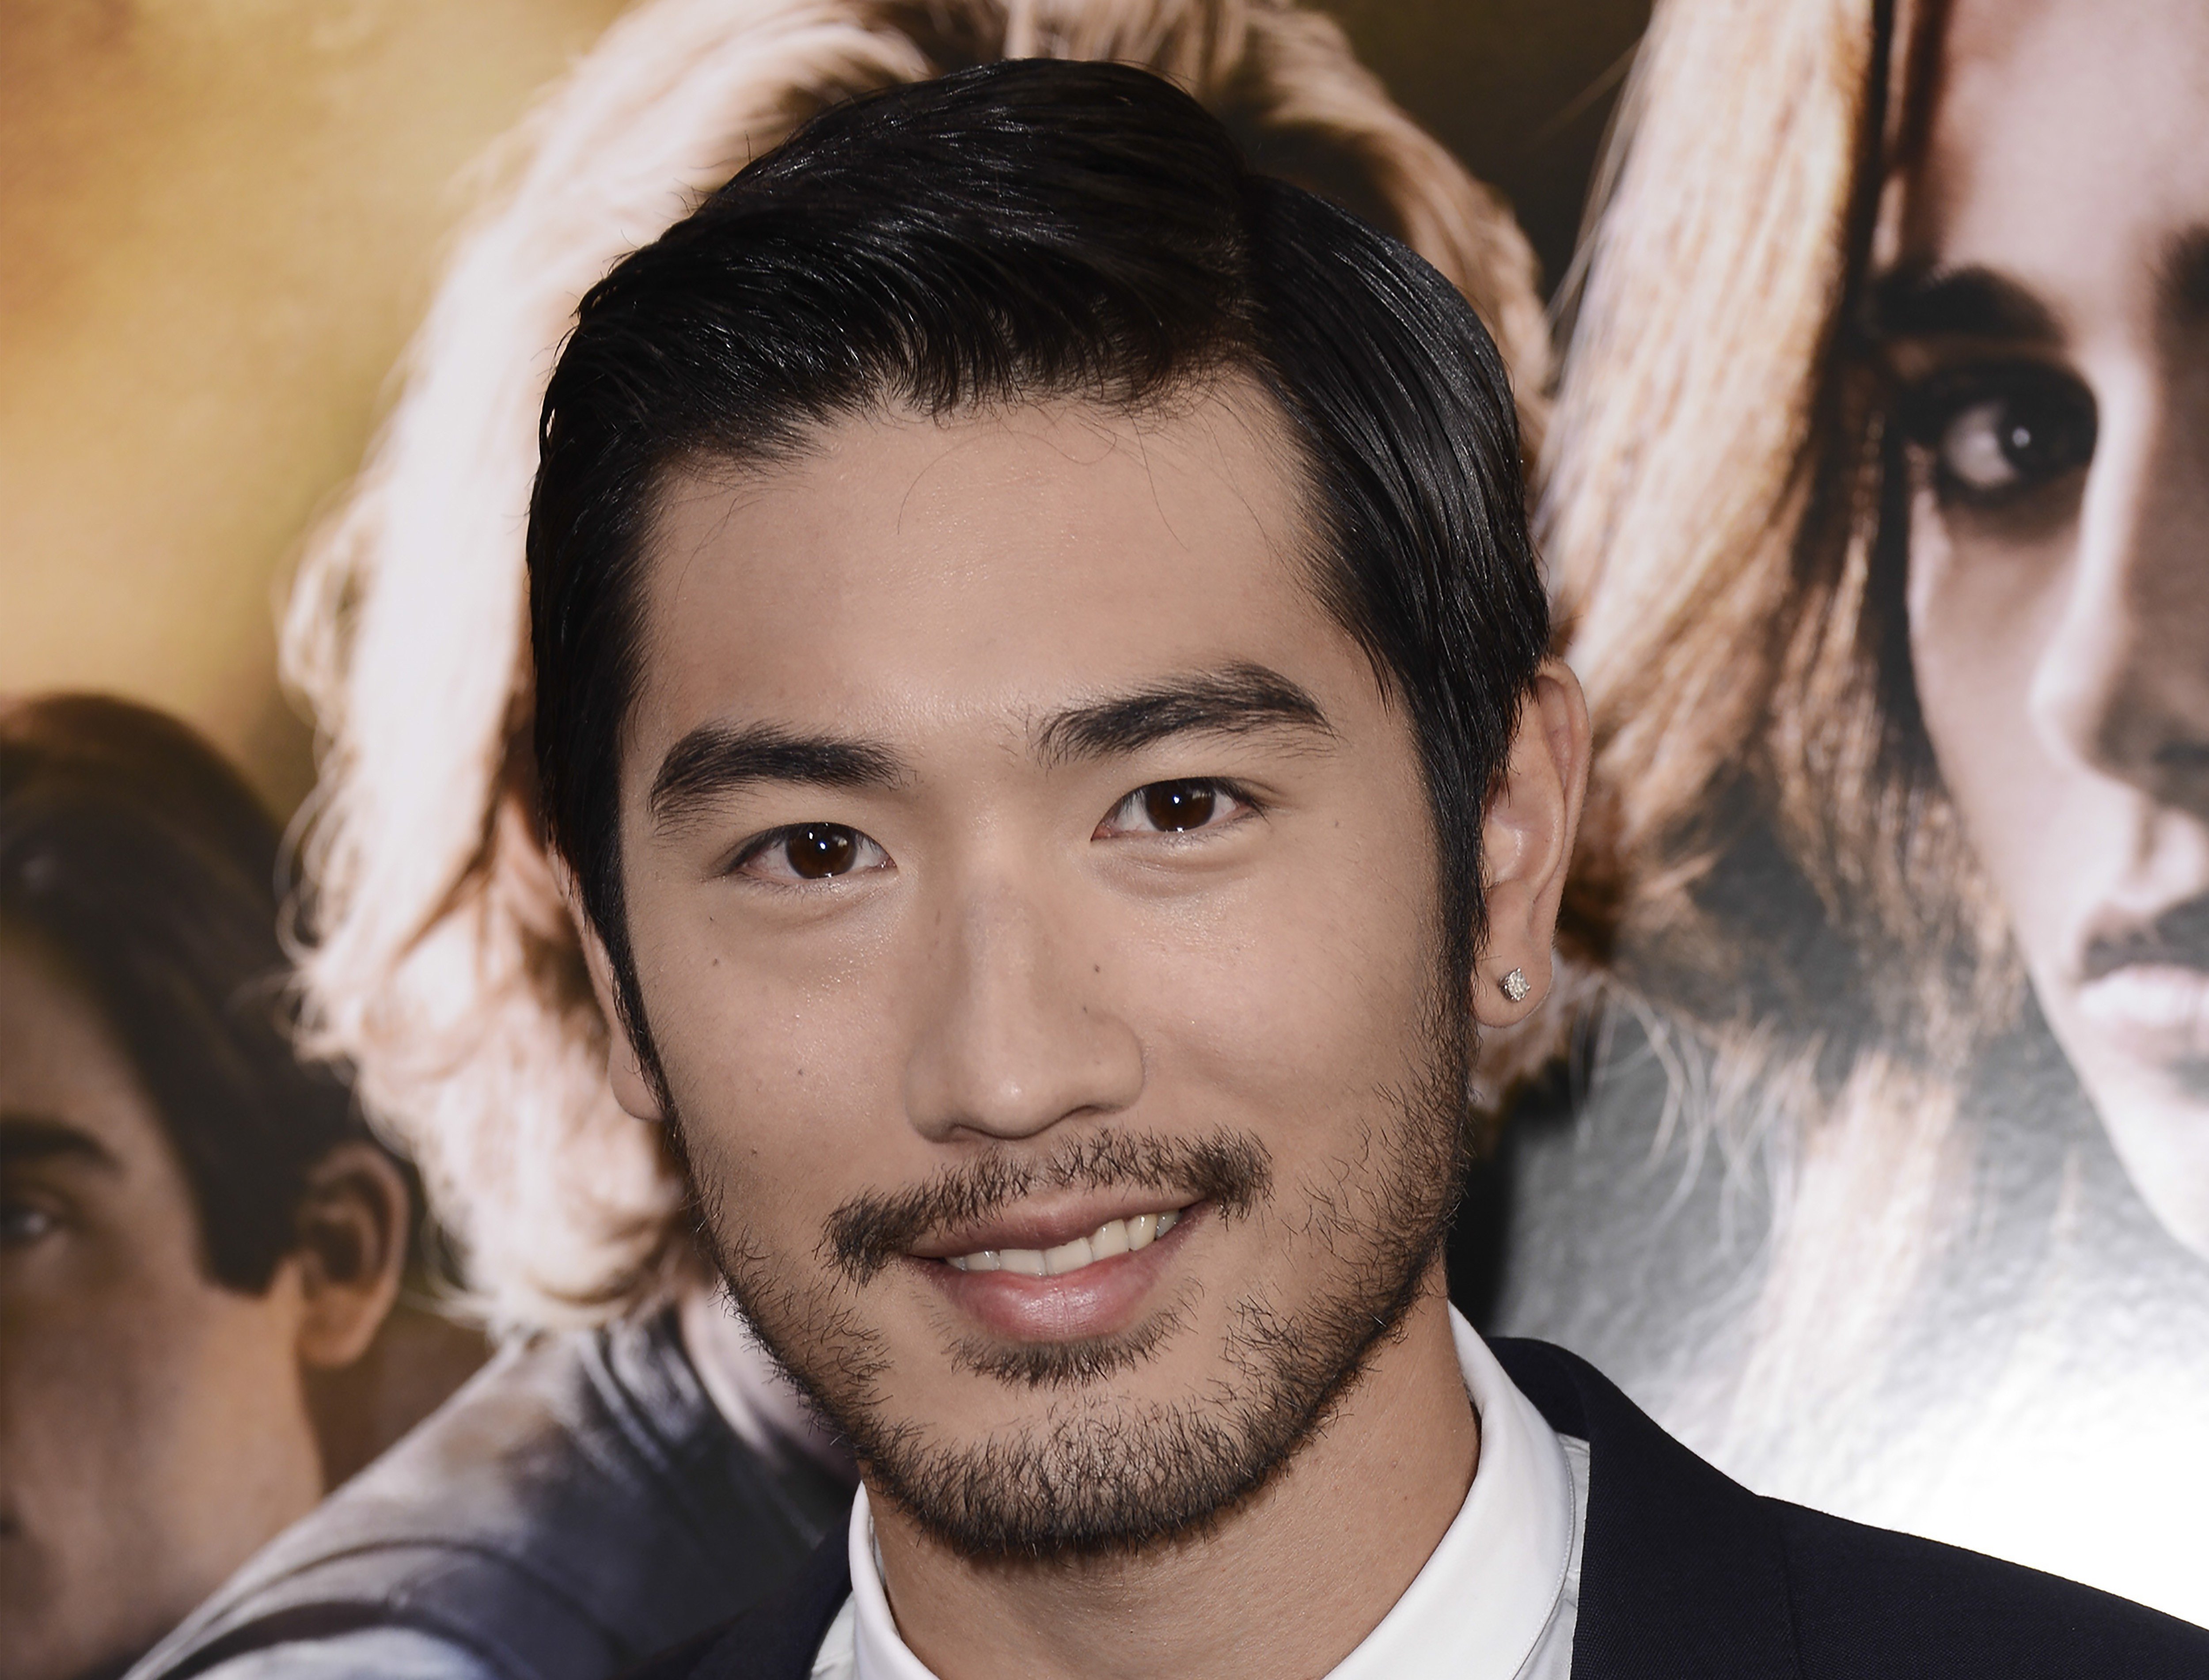 Actor Godfrey Gao helped change stereotypes about Asian men in the media. Photo: Dan Steinberg/Invision/AP